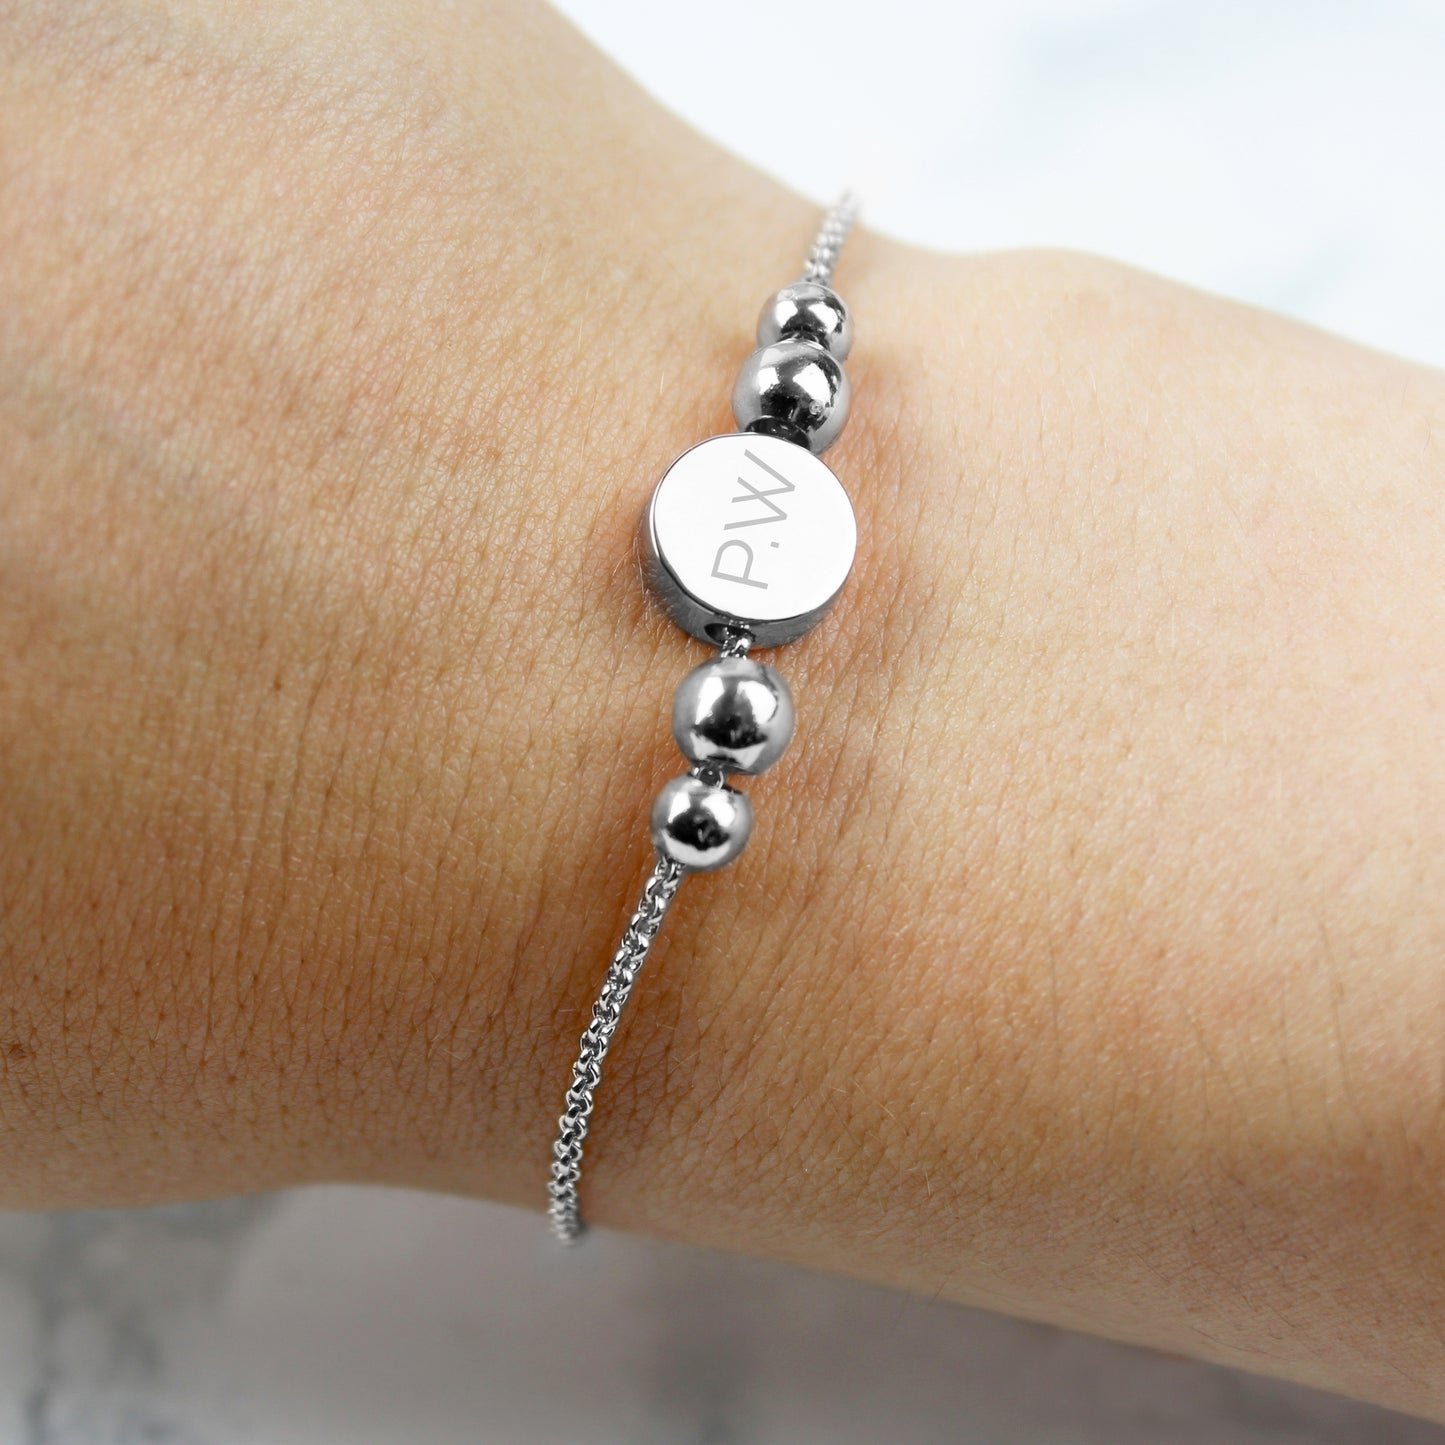 Silver plated initials bracelet - Lilybet loves